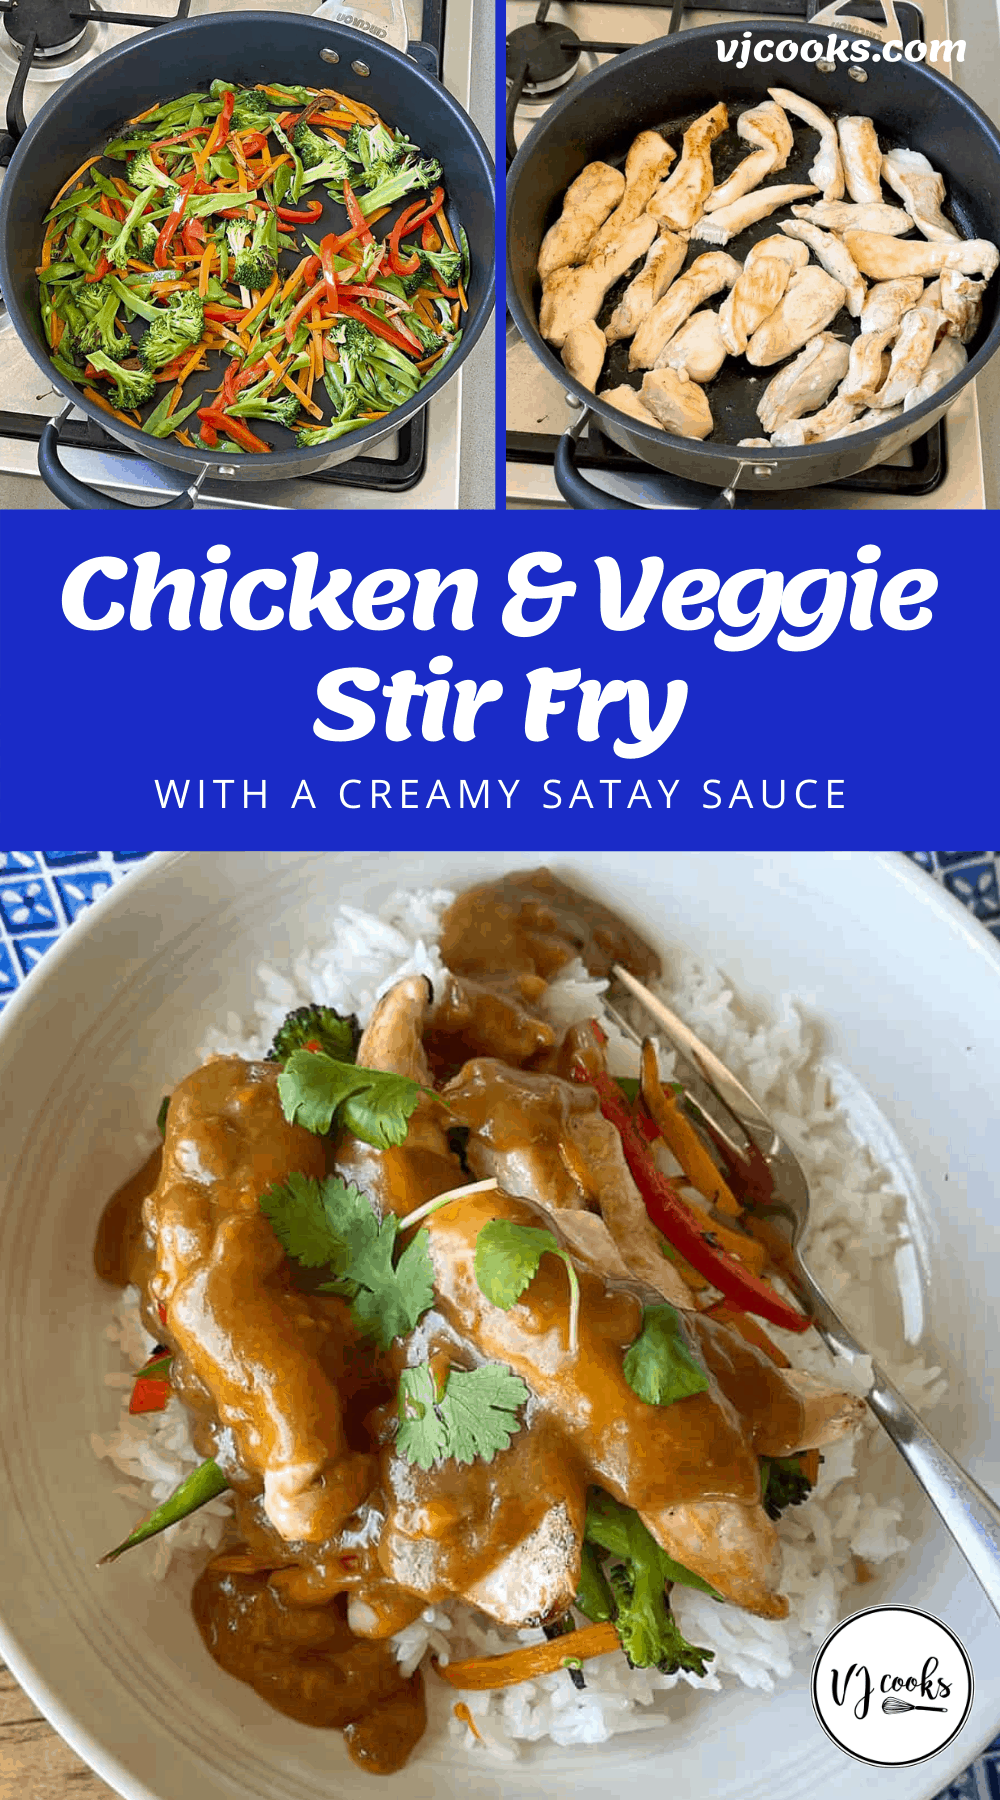 Chicken and vegetable stir fry with a creamy satay sauce